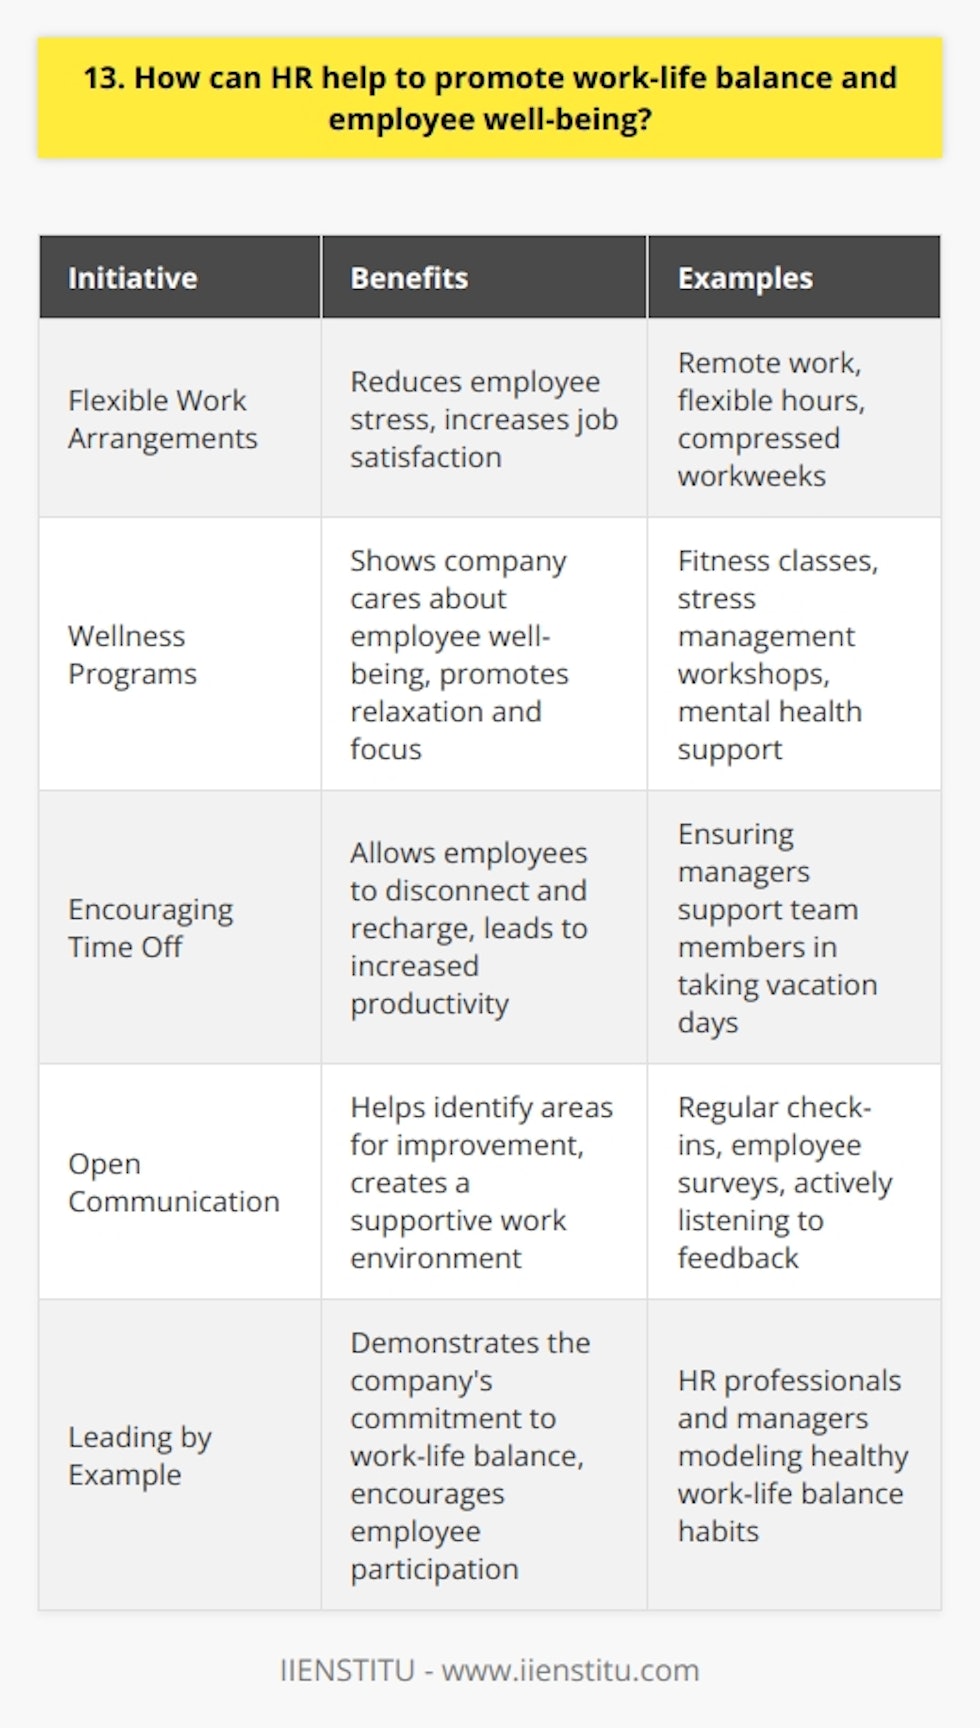 As an HR professional, I believe that promoting work-life balance and employee well-being is crucial for any organization. It not only benefits the employees but also contributes to the overall success of the company. Here are some ways HR can help: Flexible Work Arrangements Offering flexible work options like remote work, flexible hours, or compressed workweeks can greatly improve work-life balance. When I worked at my previous company, we implemented a flexible schedule policy, and it significantly reduced employee stress and increased job satisfaction. Wellness Programs HR can organize various wellness initiatives such as fitness classes, stress management workshops, or mental health support. These programs show that the company cares about its employees well-being. I remember participating in a yoga class organized by our HR department, and it helped me feel more relaxed and focused at work. Encouraging Time Off Its essential to encourage employees to take their vacation days and disconnect from work during their time off. HR can lead by example and ensure that managers support their team members in taking breaks. When I took a much-needed vacation last year, I came back to work feeling refreshed and more productive. Open Communication HR should foster open communication channels where employees feel comfortable discussing their work-life balance concerns. Regular check-ins and surveys can help identify areas where improvements are needed. I appreciate it when HR actively listens to my feedback and takes steps to address any issues. In my experience, when a company prioritizes work-life balance and employee well-being, it creates a positive work environment where people are more engaged, productive, and loyal. As an HR professional, I am committed to implementing strategies that support this balance and contribute to the overall success of the organization.